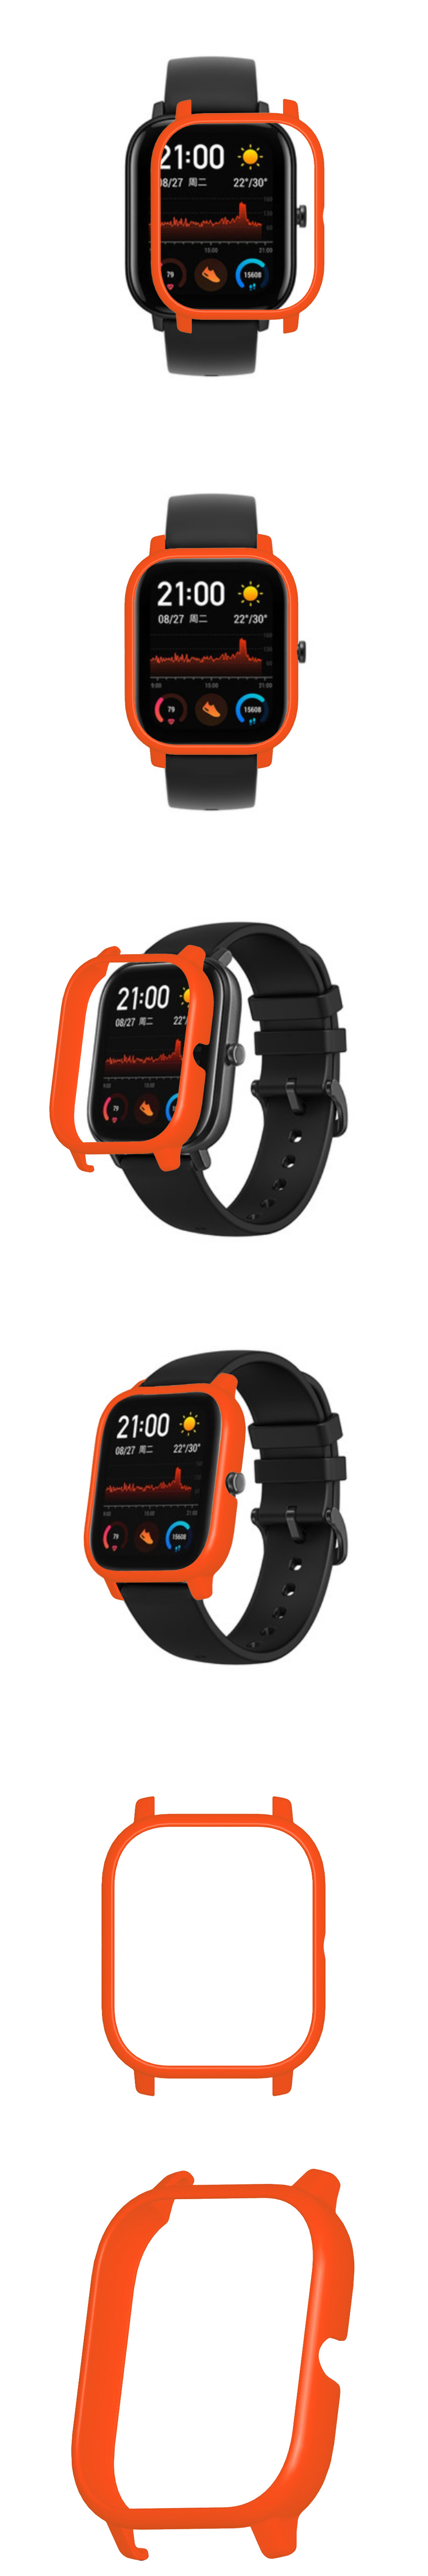 Color-PC-Watch-Case-Cover-Watch-Cover-Screen-Protector-for-Amazfit-GTS-1582191-2